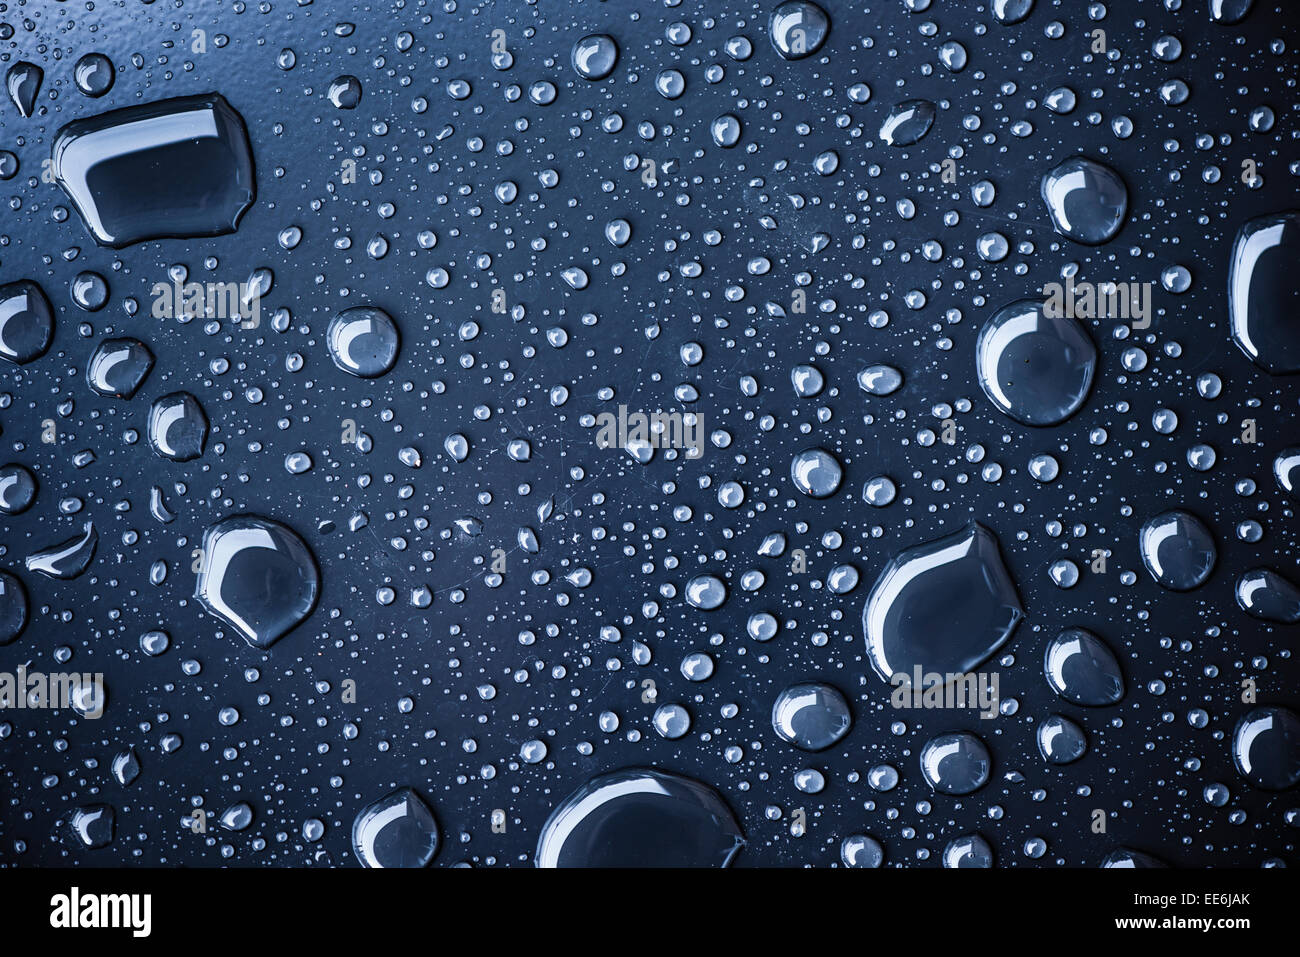 Close up of water drops on dark metallic surface Stock Photo